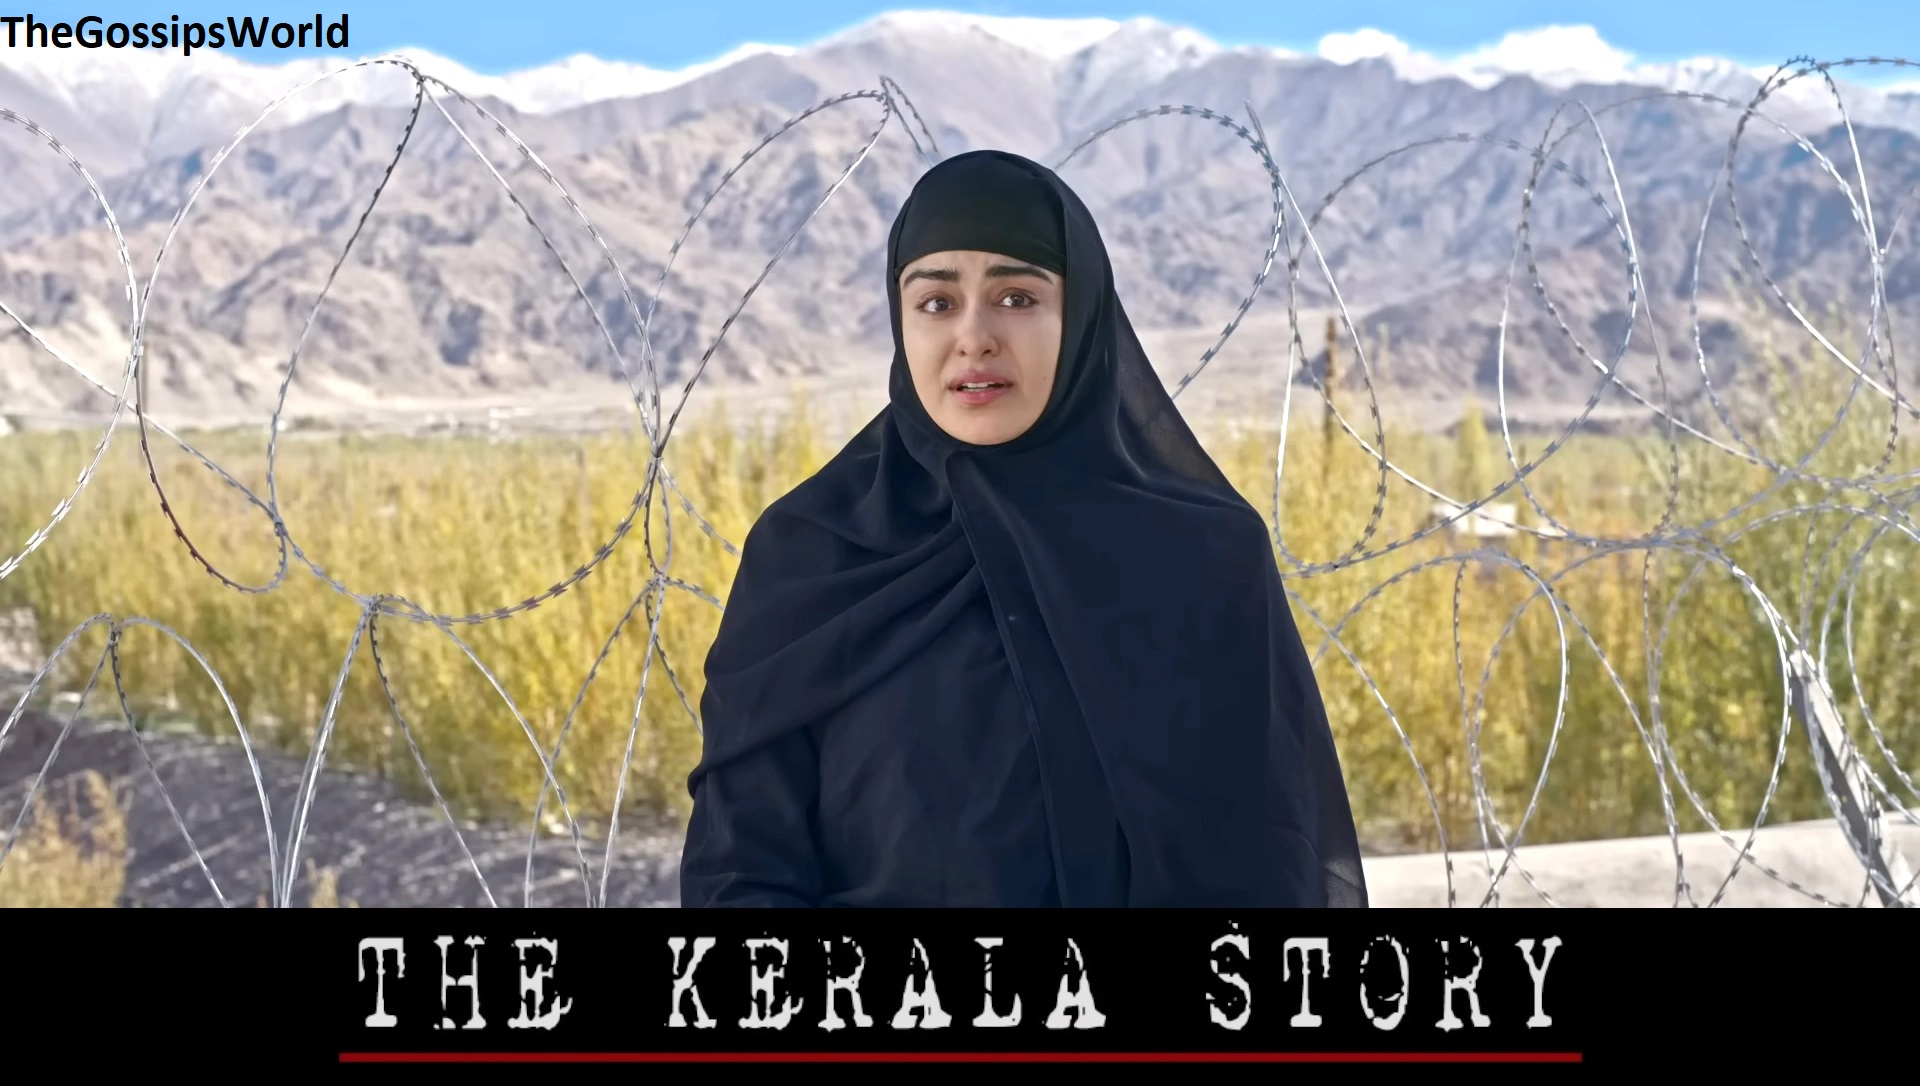 The Kerala Story Film Controversy